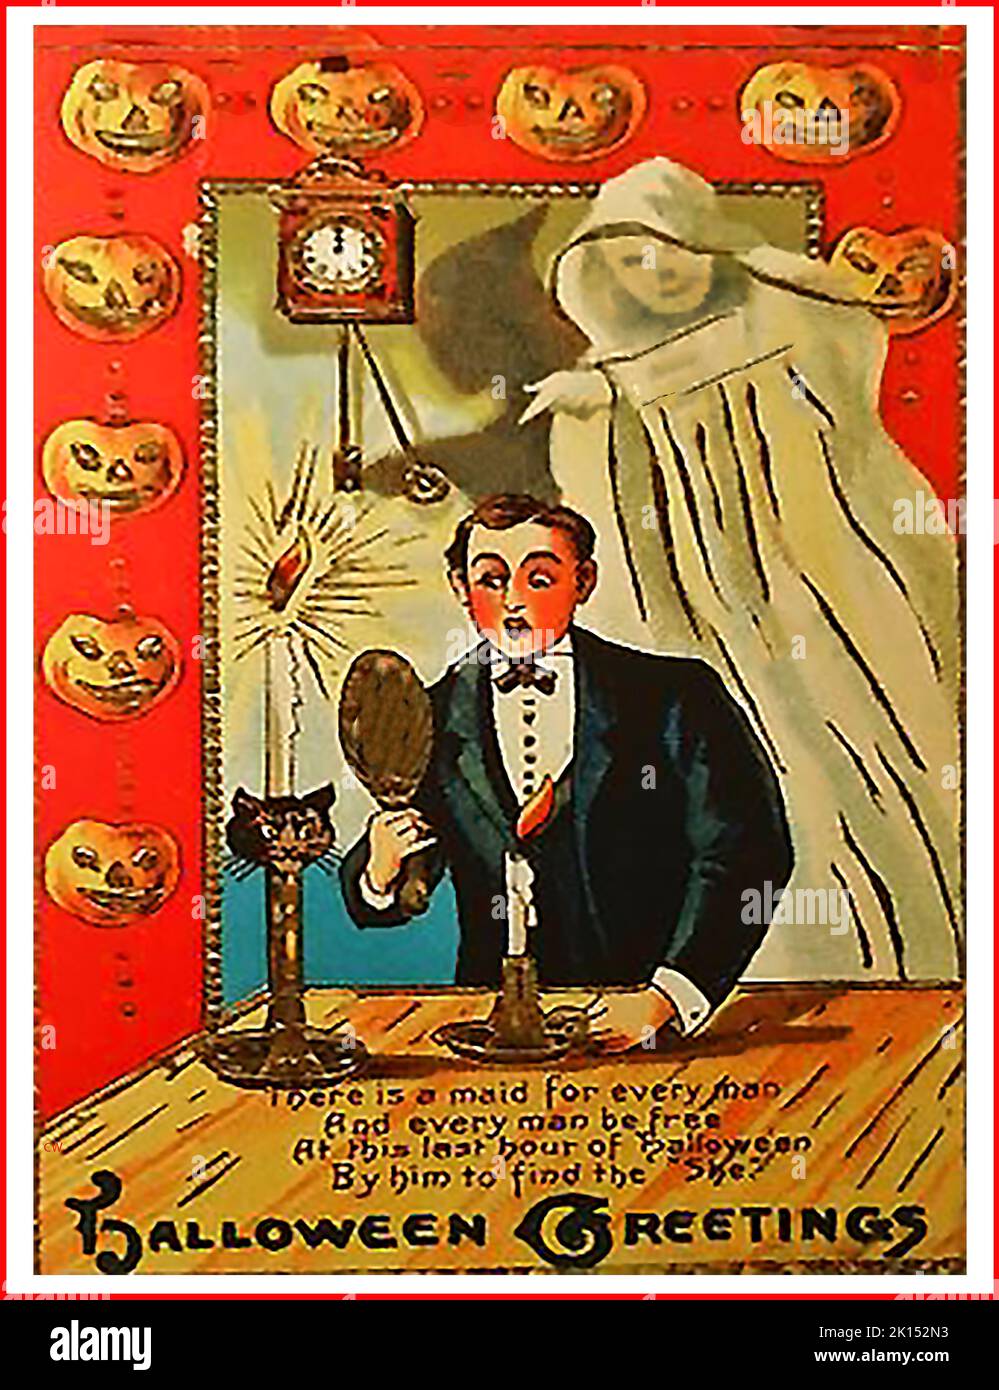 An old Halloween greetings card featuring a  ghost and a magic mirror which was supposed to reveal the face of the person someone would marry, if looked at during the final hour of Halloween Stock Photo